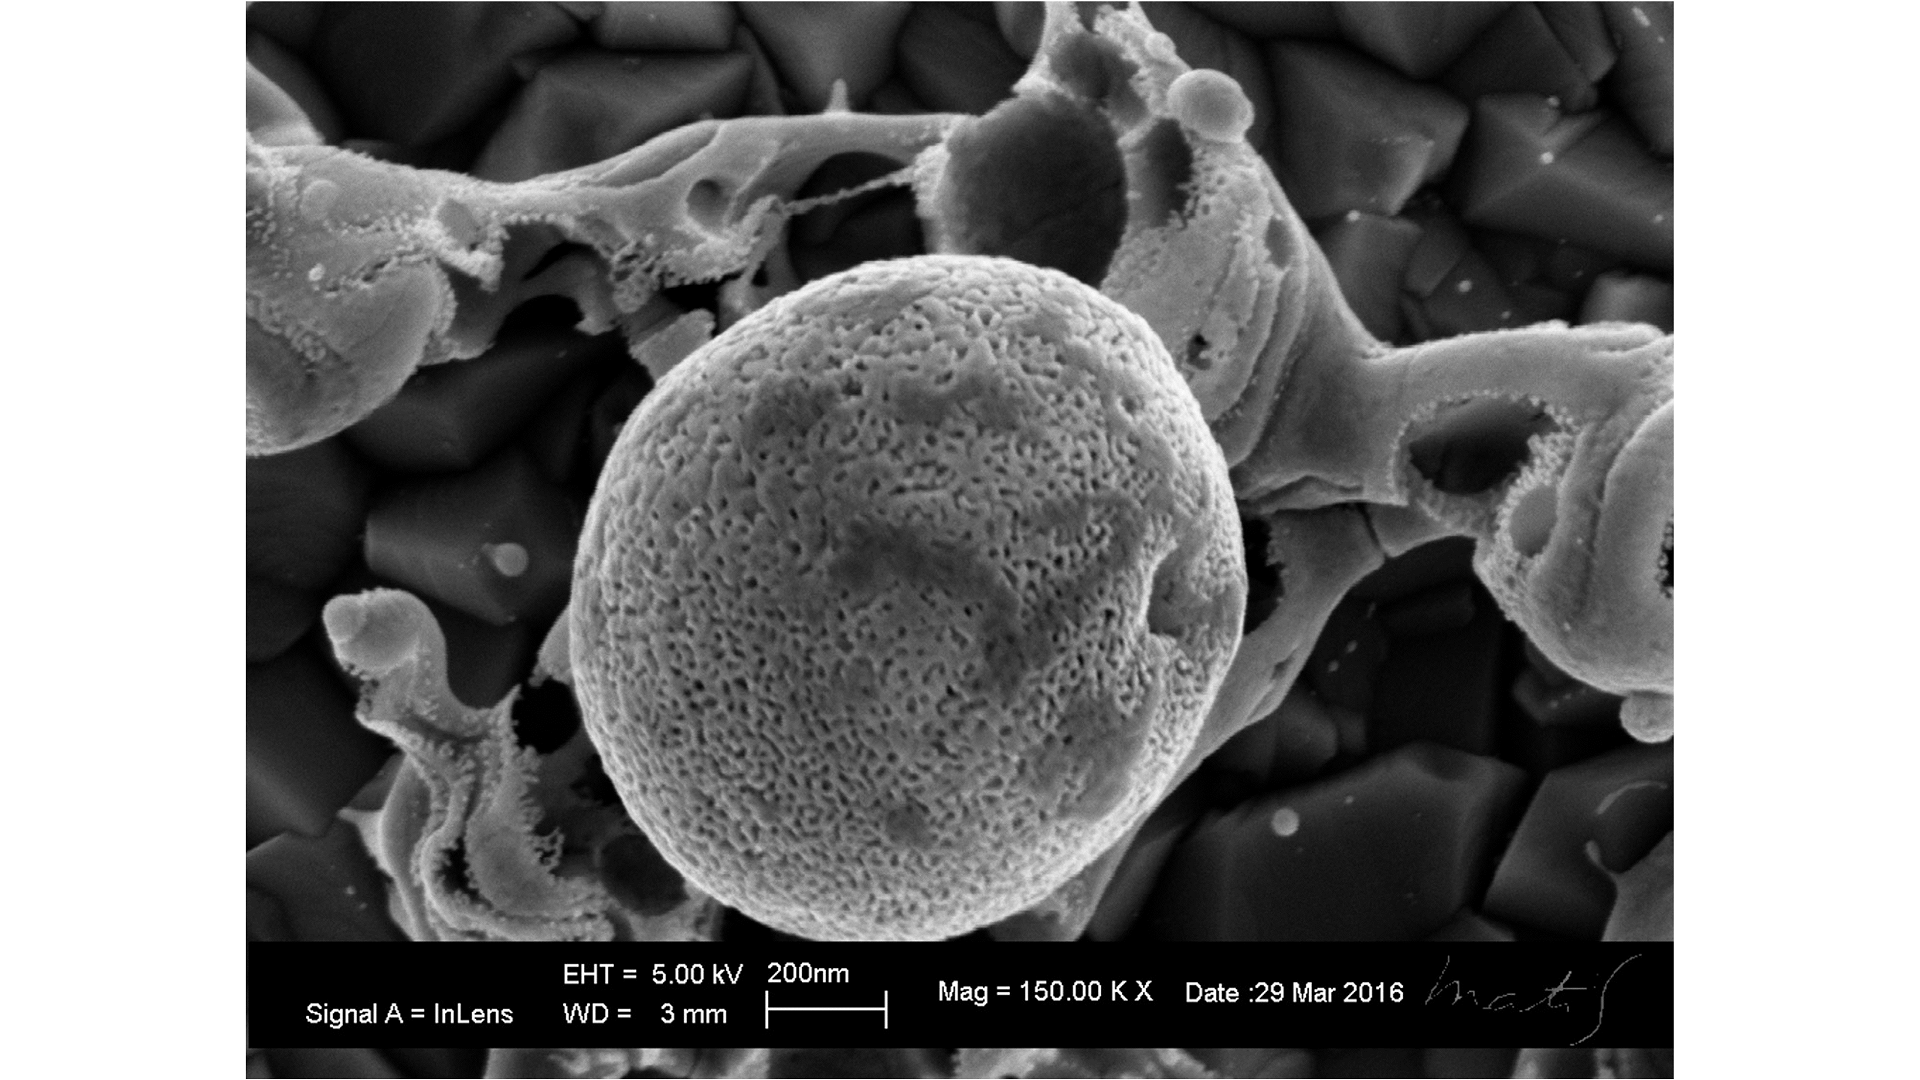 Scanning electron microscopy image of nanoporous Au particles obtained by the dealloying process of AuAg particles resulting from the chemical etching (in HNO3 solution) of the Ag atoms from the alloy particles.